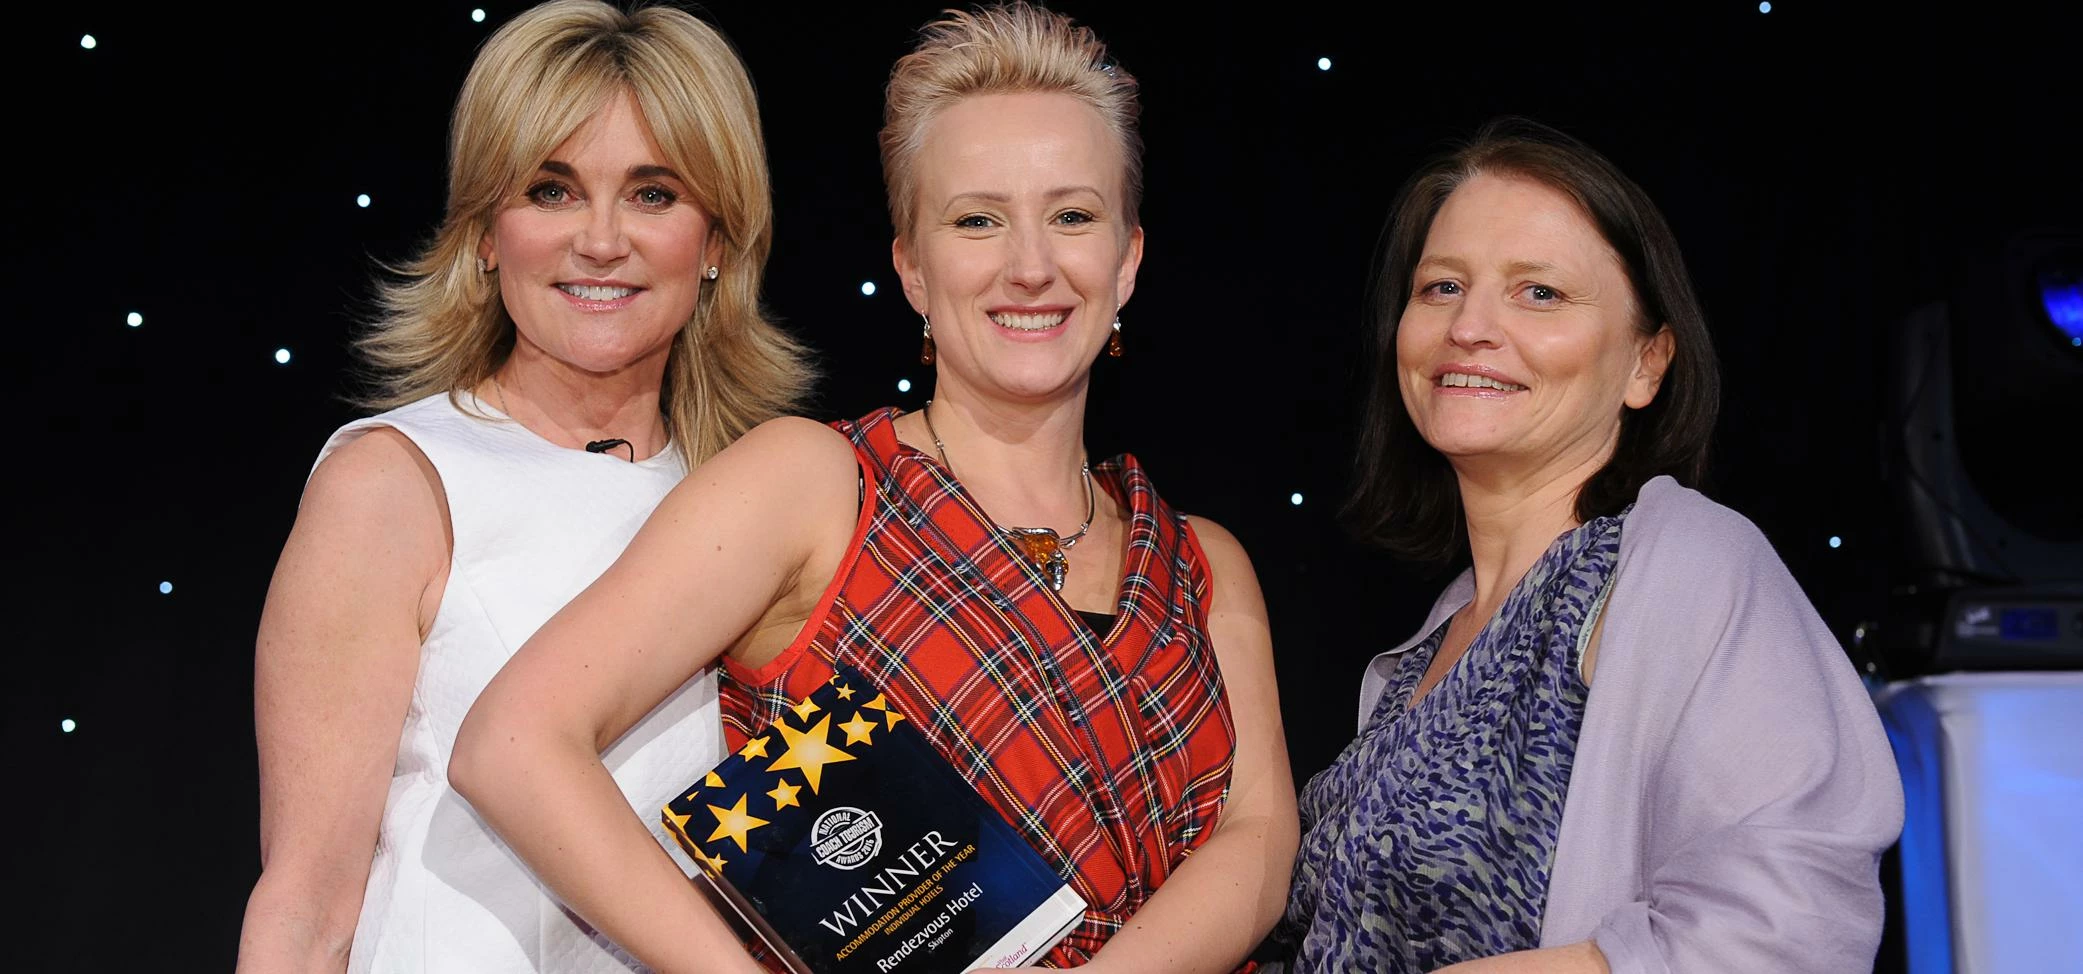 Agata Rusinek (centre) receiving the award from Anthea Turner